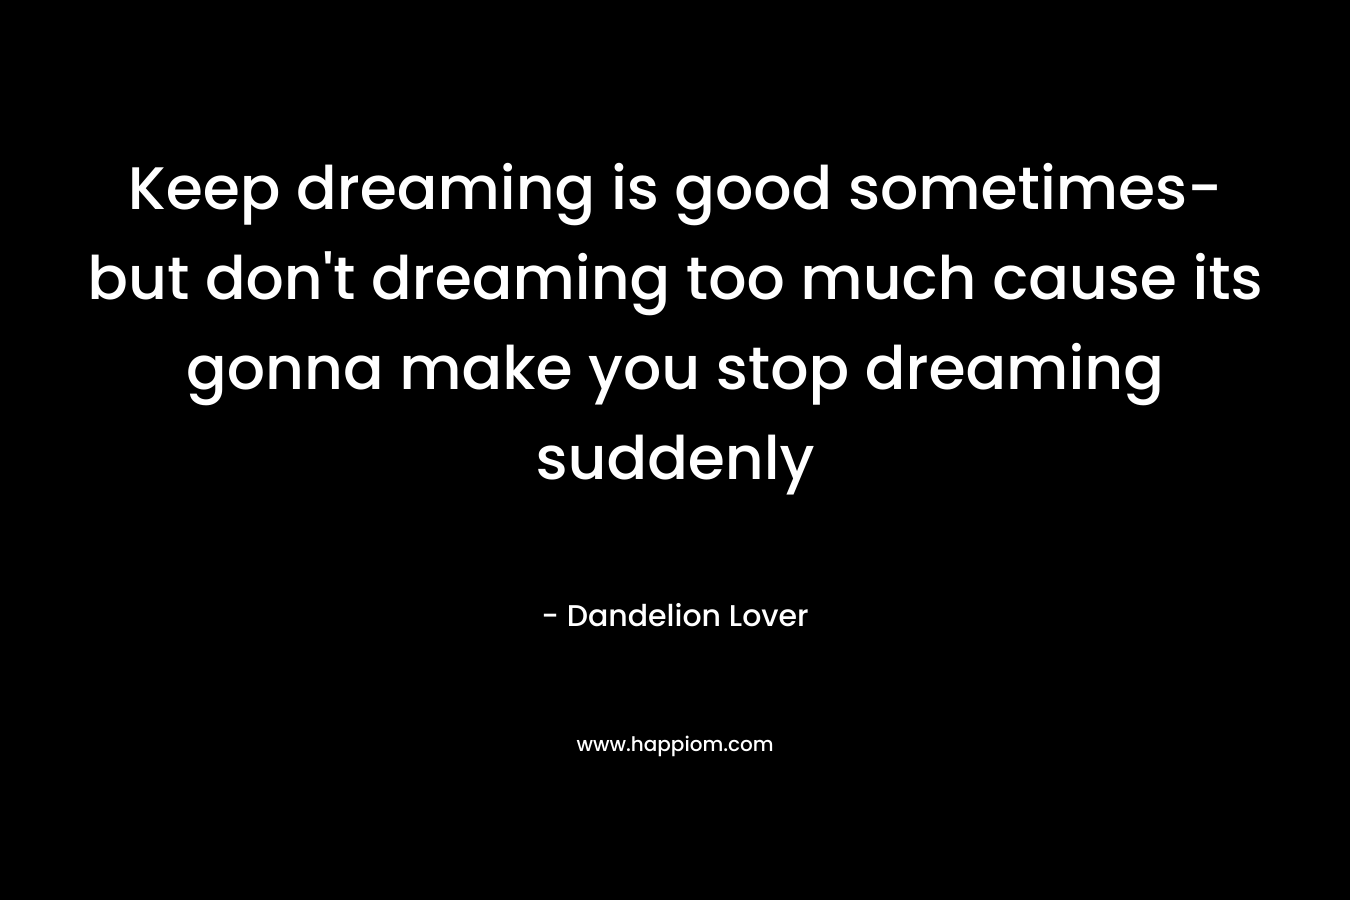 Keep dreaming is good sometimes- but don't dreaming too much cause its gonna make you stop dreaming suddenly